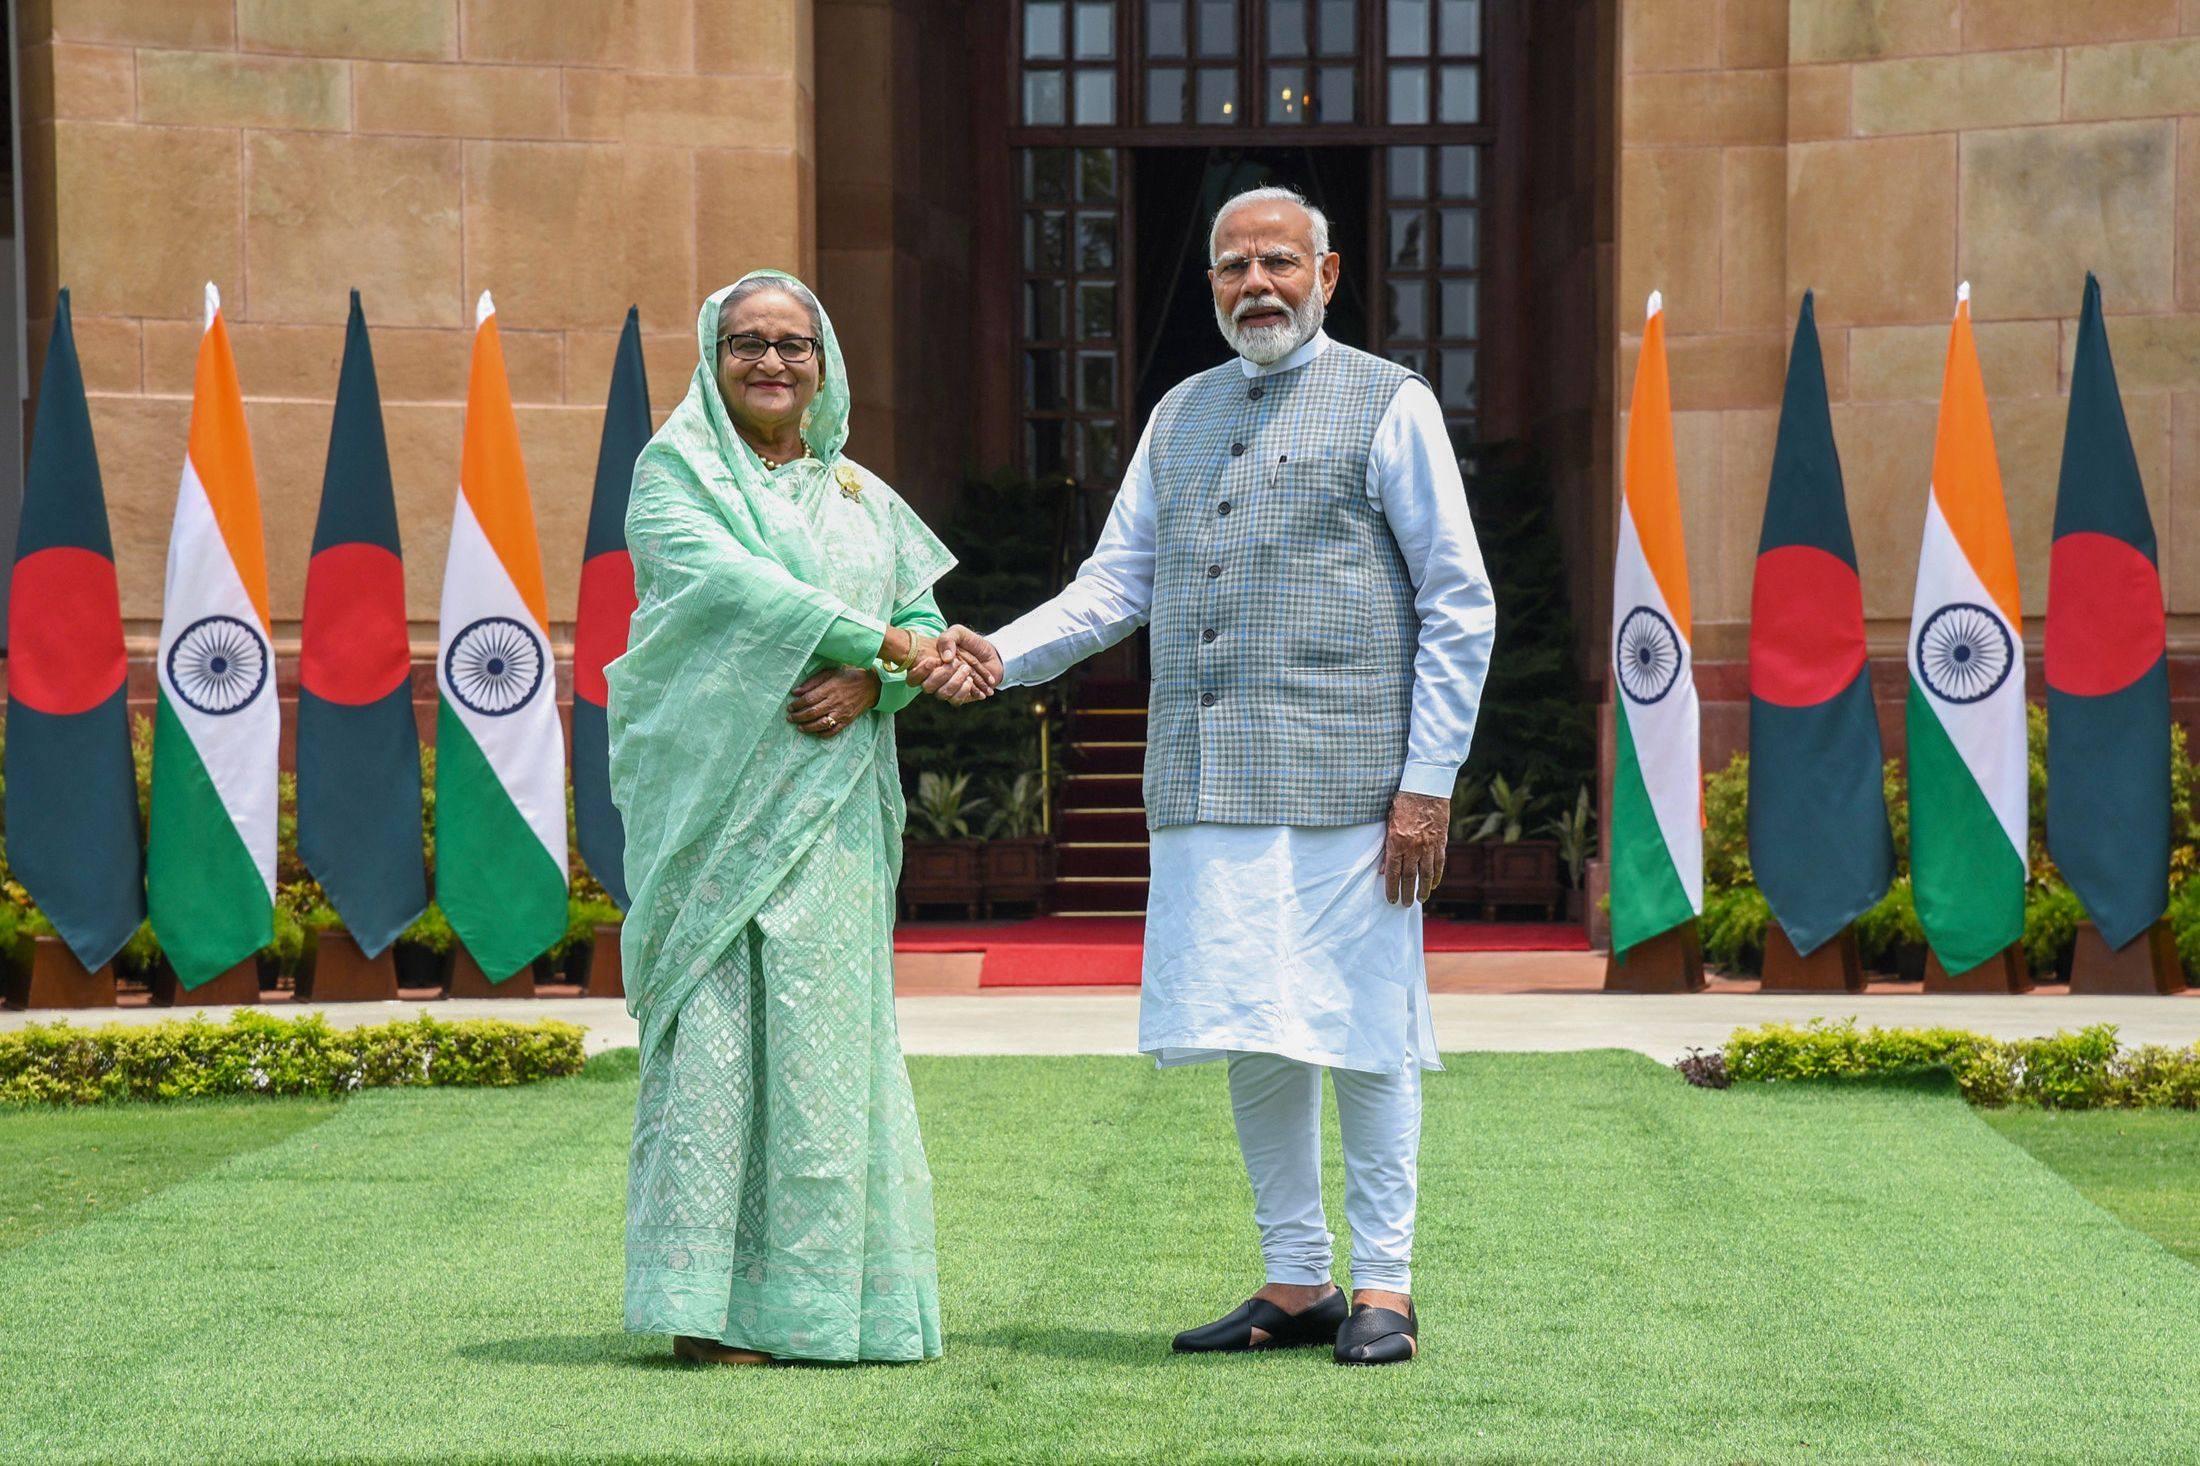 India’s Prime Minister Narendra Modi shakes hands with his Bangladesh counterpart Sheikh Hasina upon their arrival at the Hyderabad house in New Delhi. Photo: Indian Press Information Bureau (PIB) / AFP